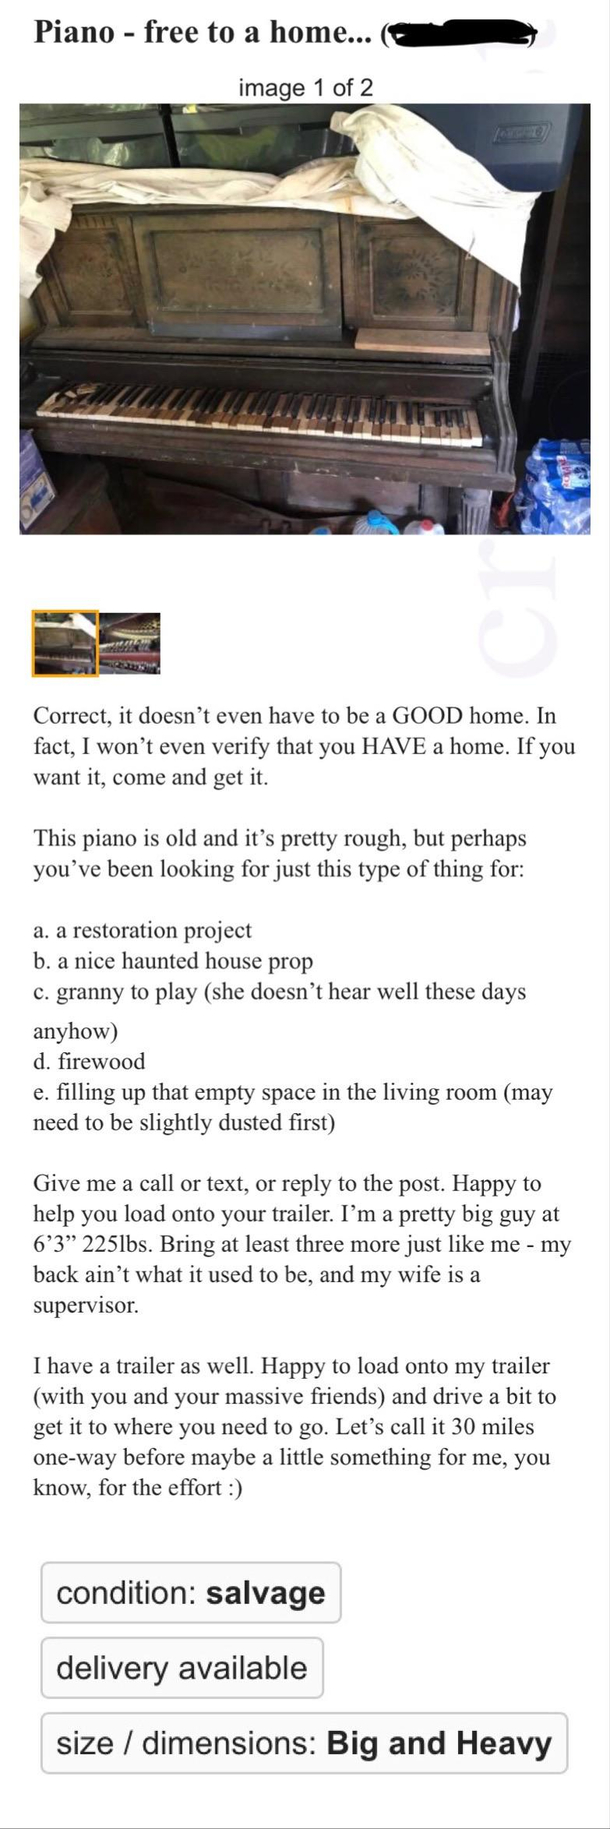 This piano advertisement my dad found